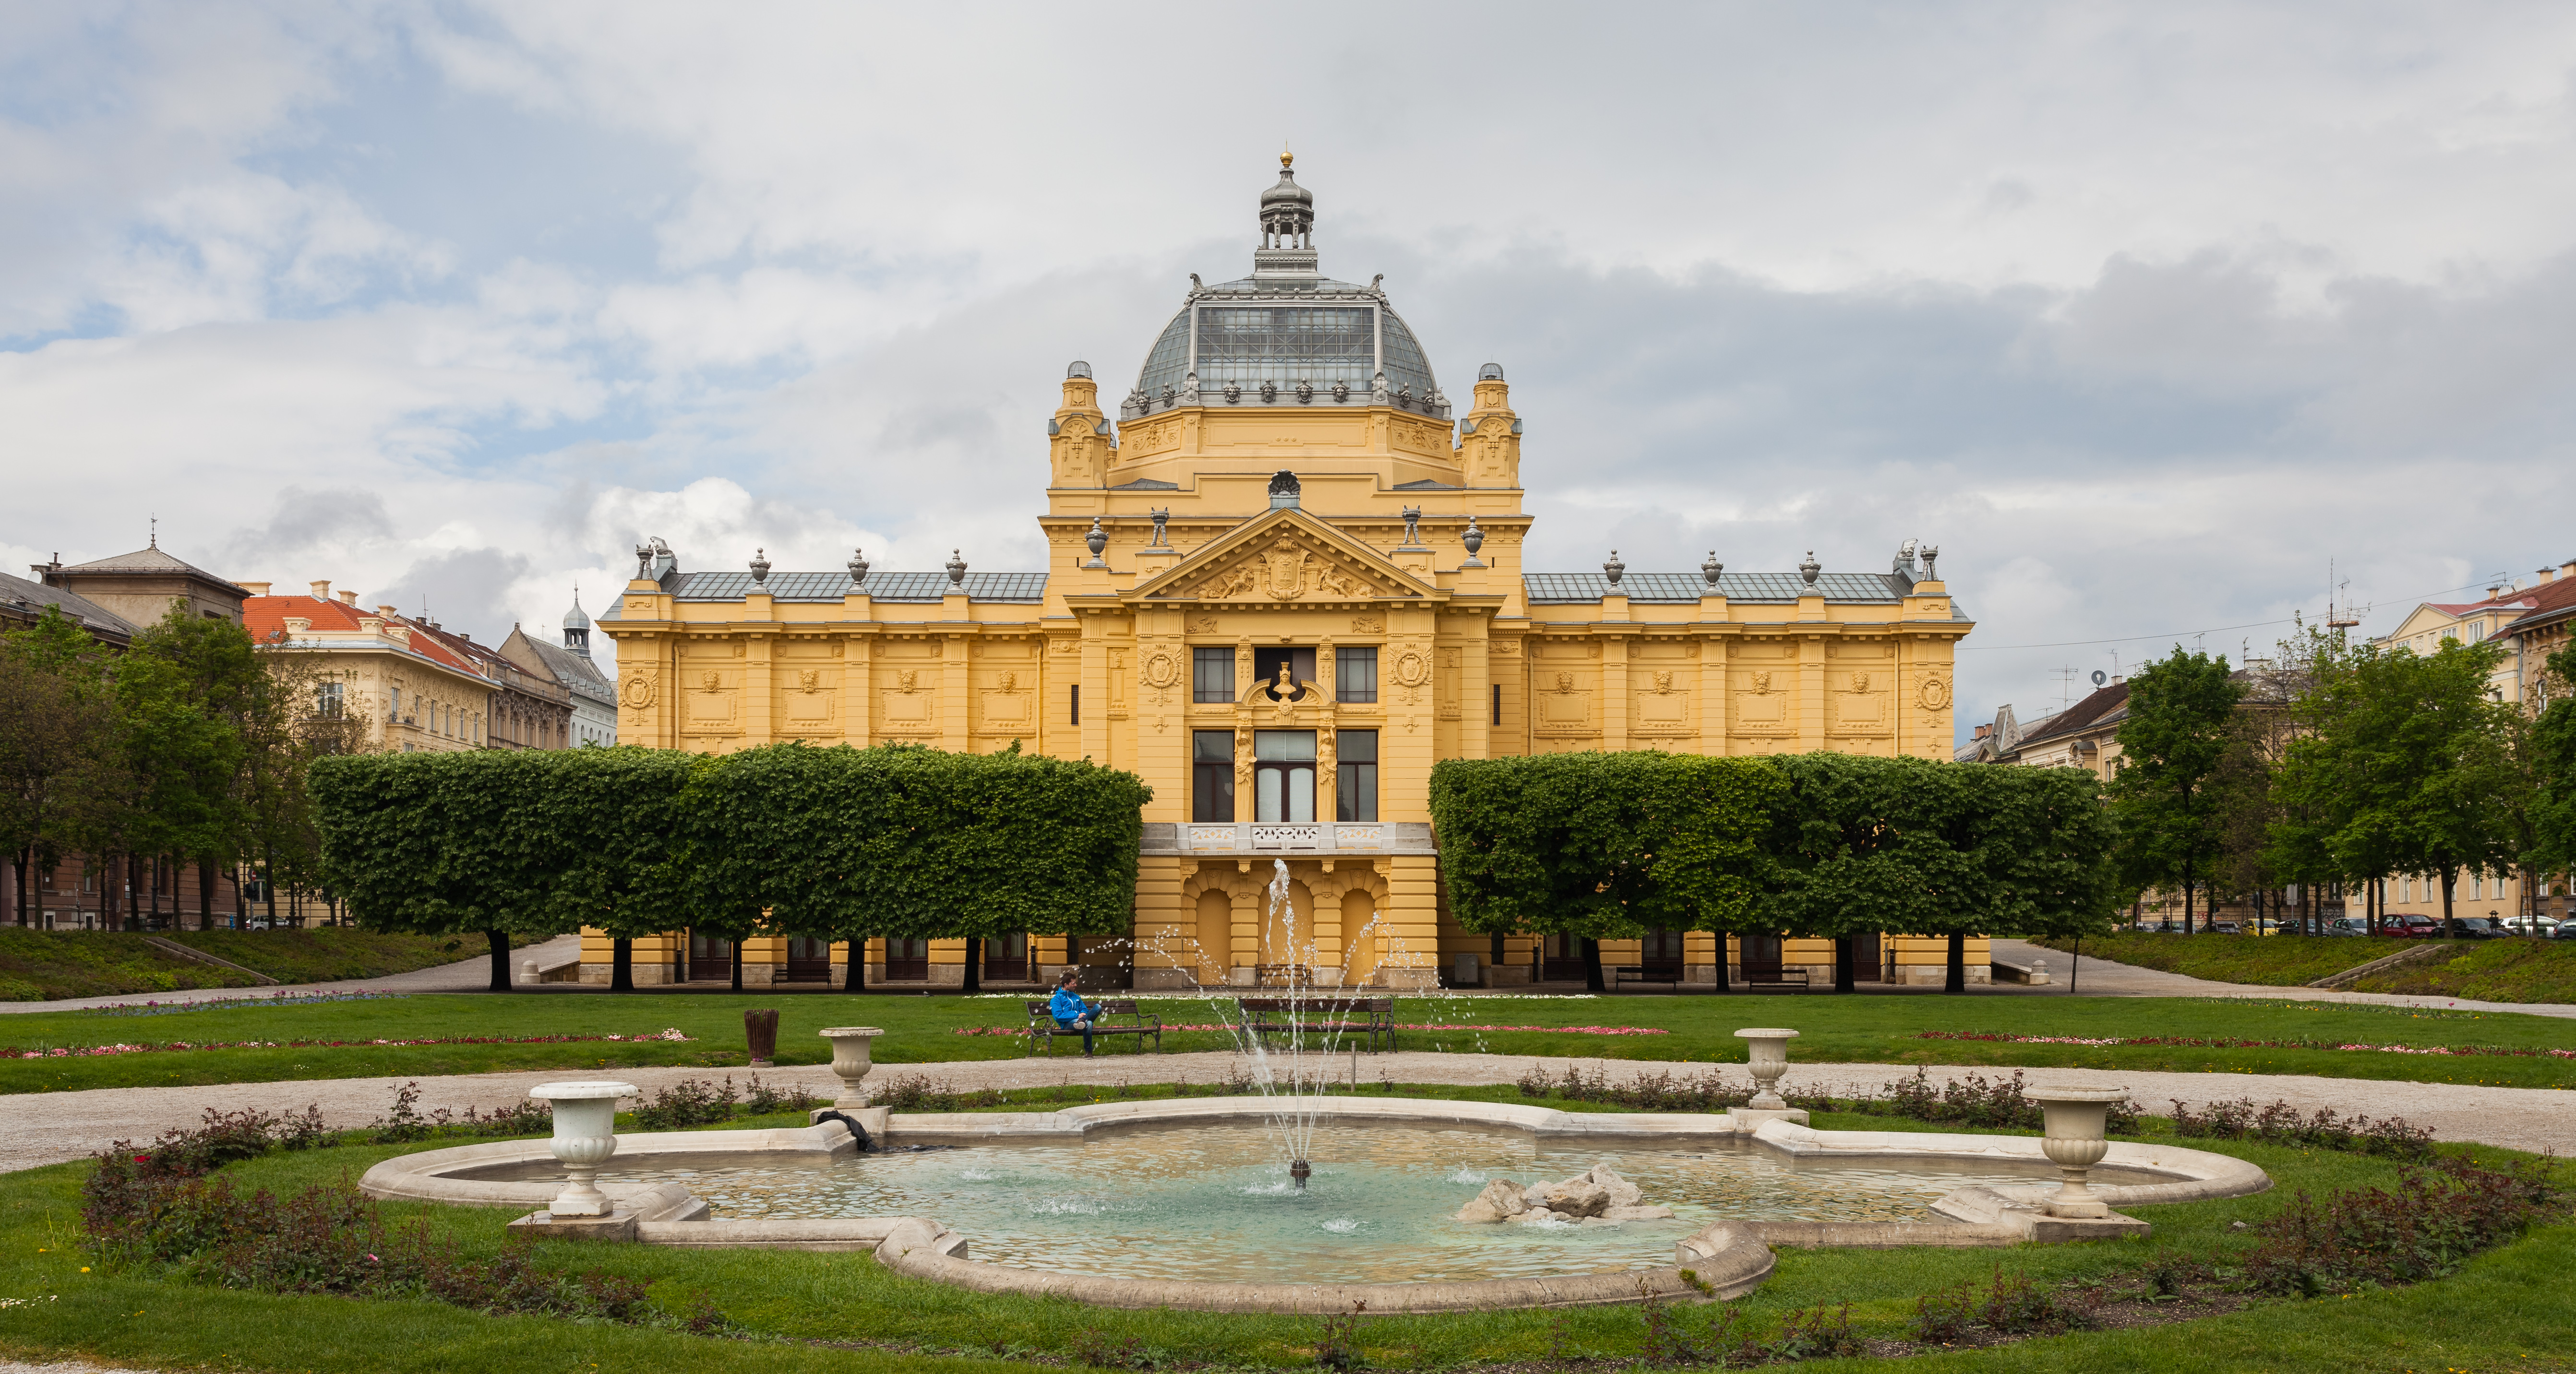 Discover Zagreb's Enchanting Legends and Create Your Own Adventure